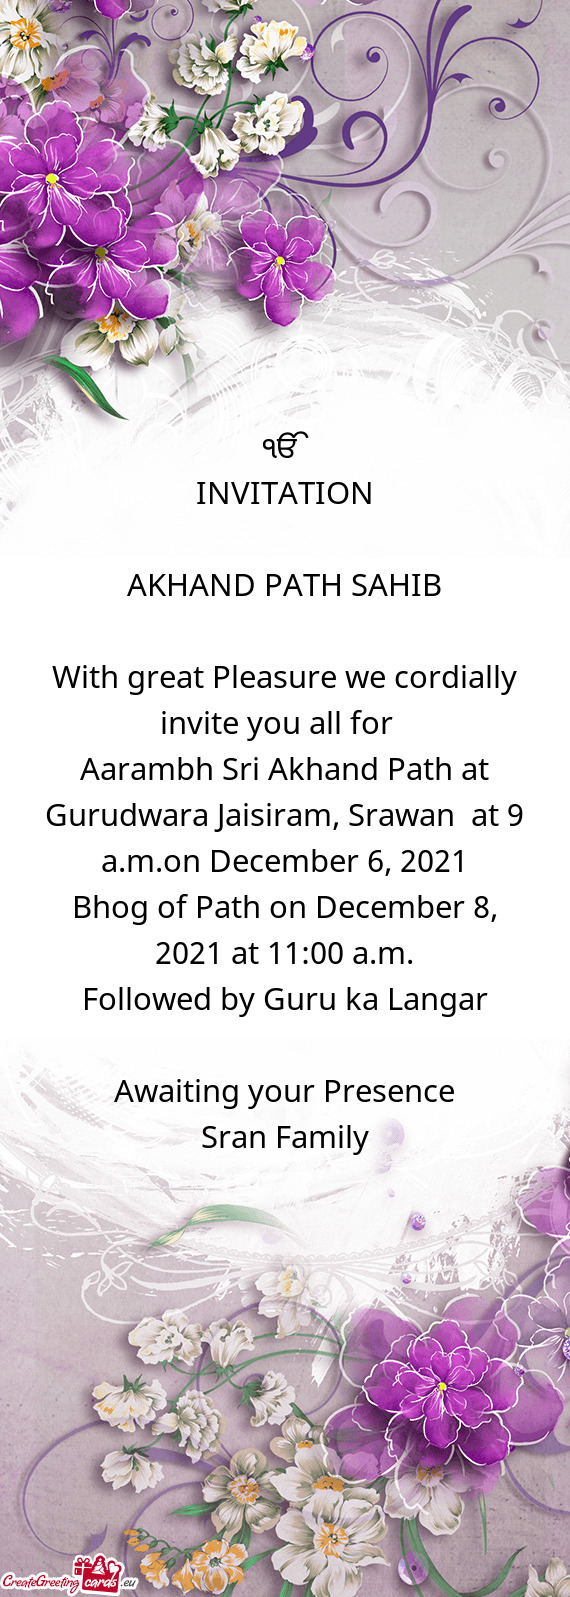 Bhog of Path on December 8, 2021 at 11:00 a.m